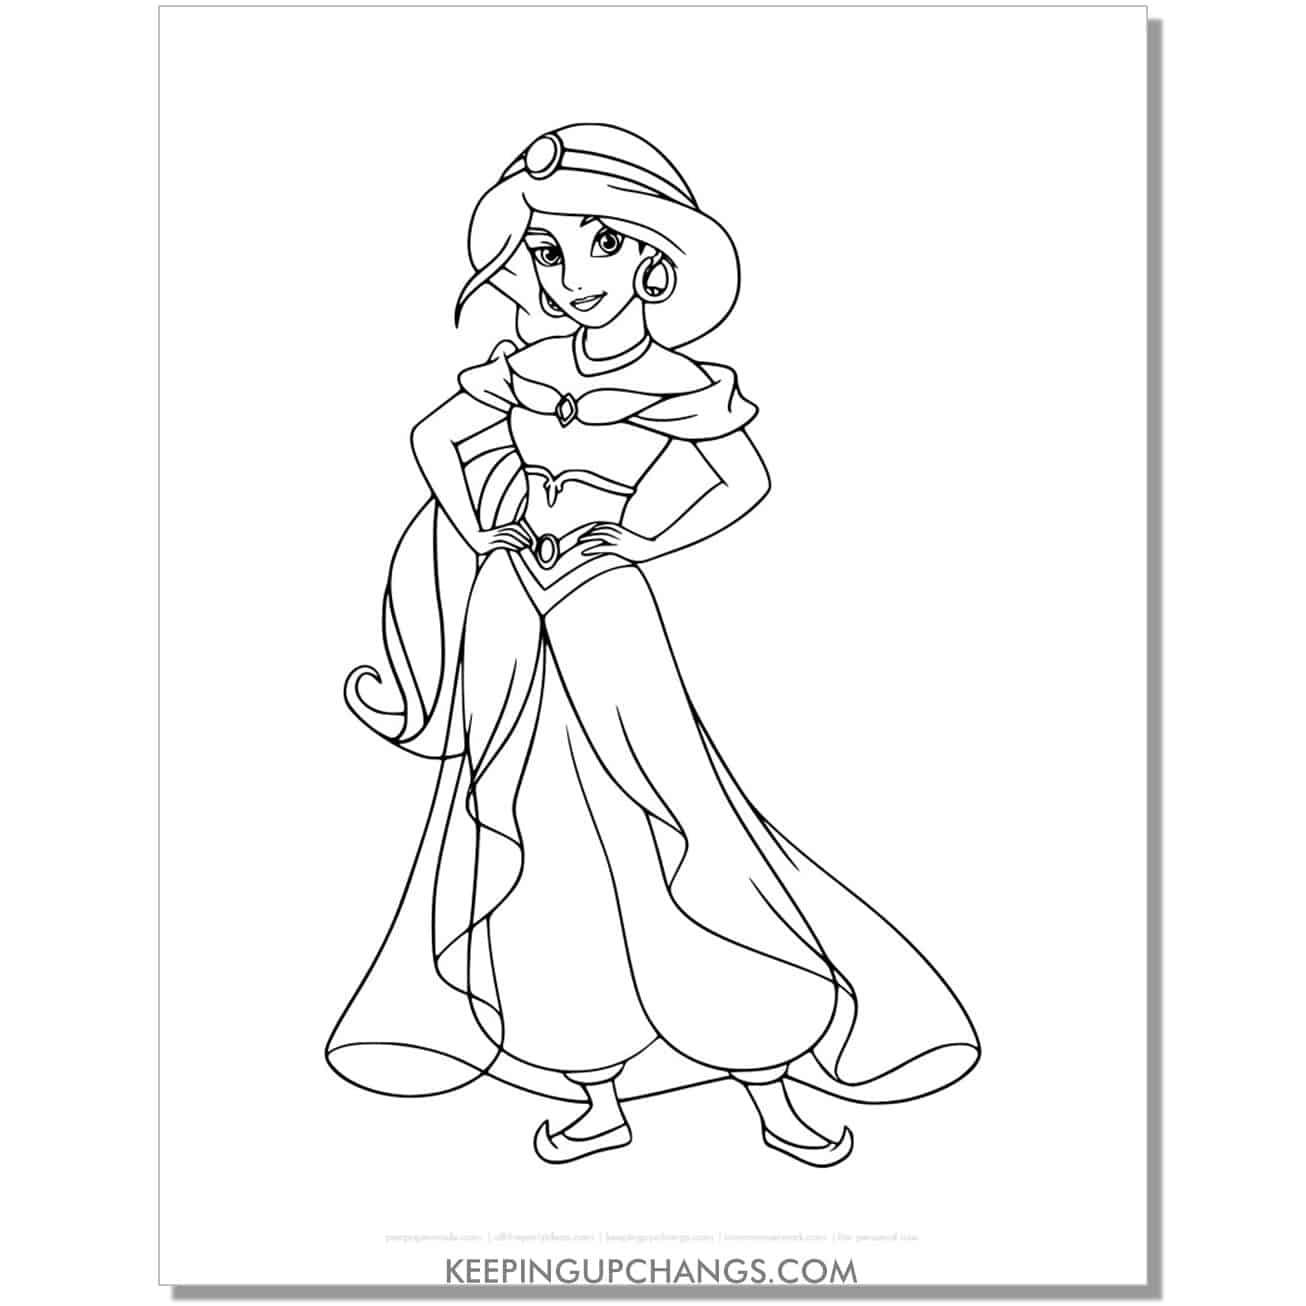 jasmine with hands on hips coloring page, sheet.